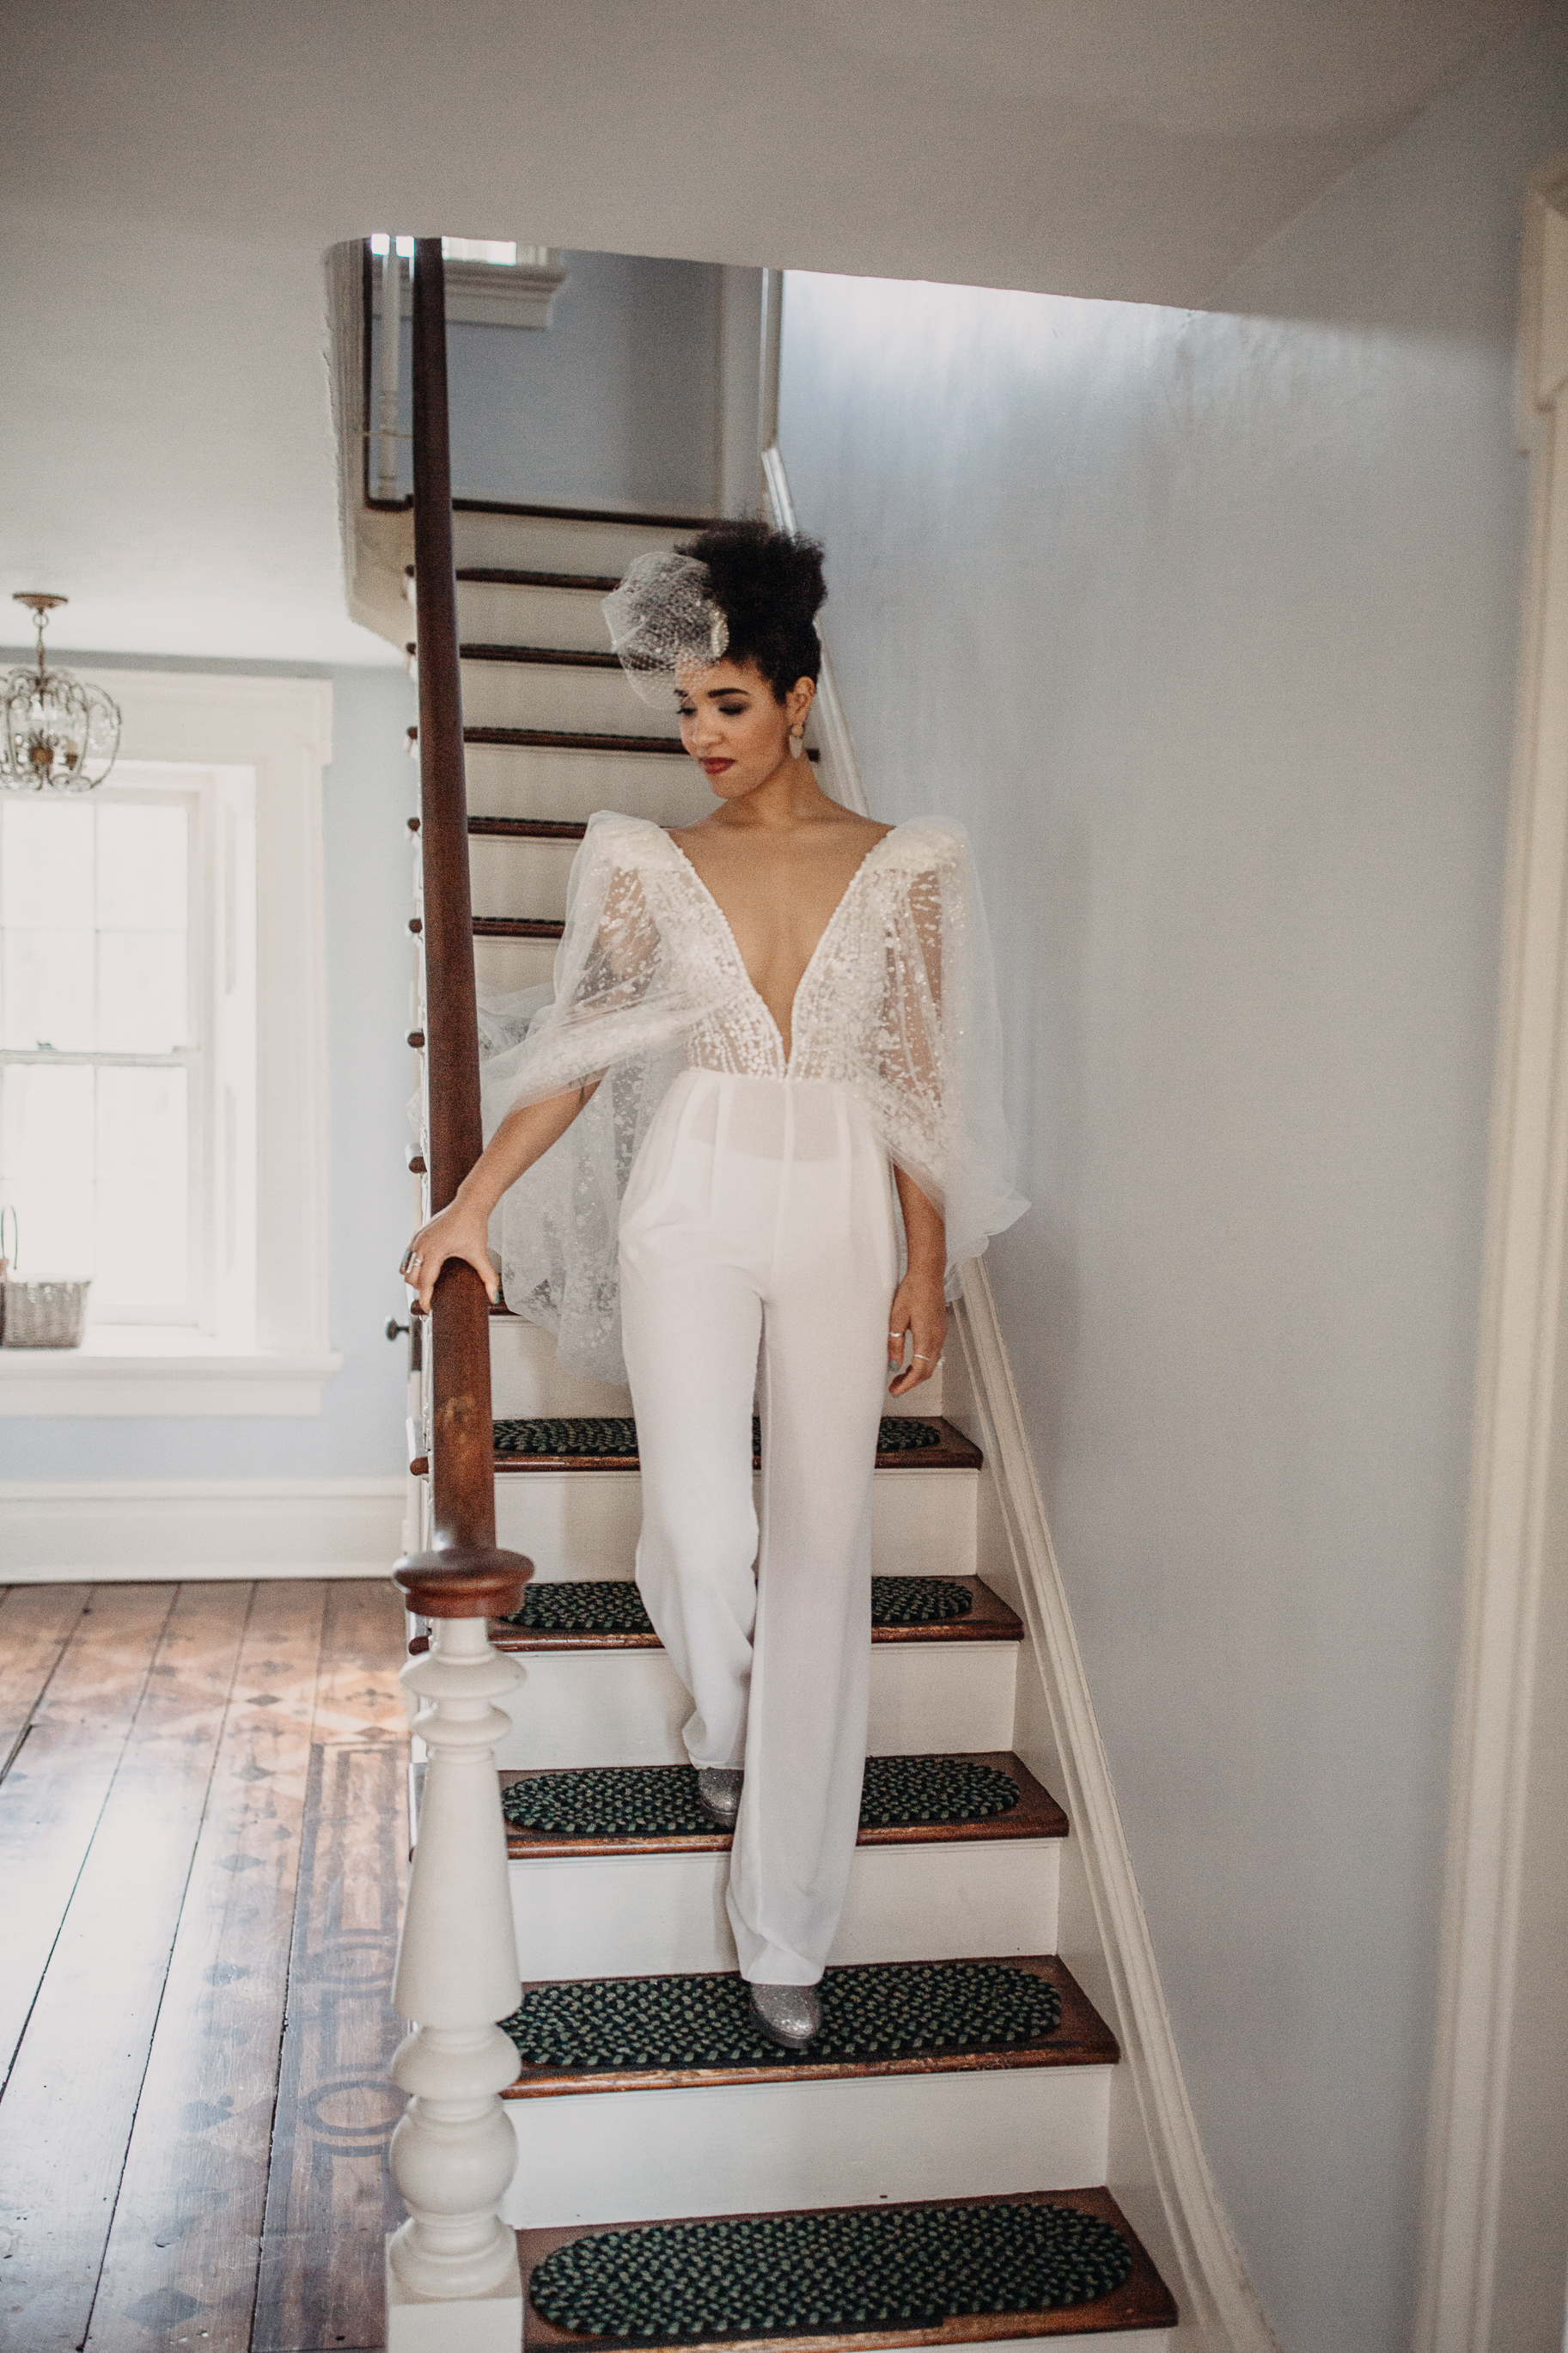 Pant suit wedding gown with a cape from Dany Mizarachi Bridal - Pearl Weddings & Events